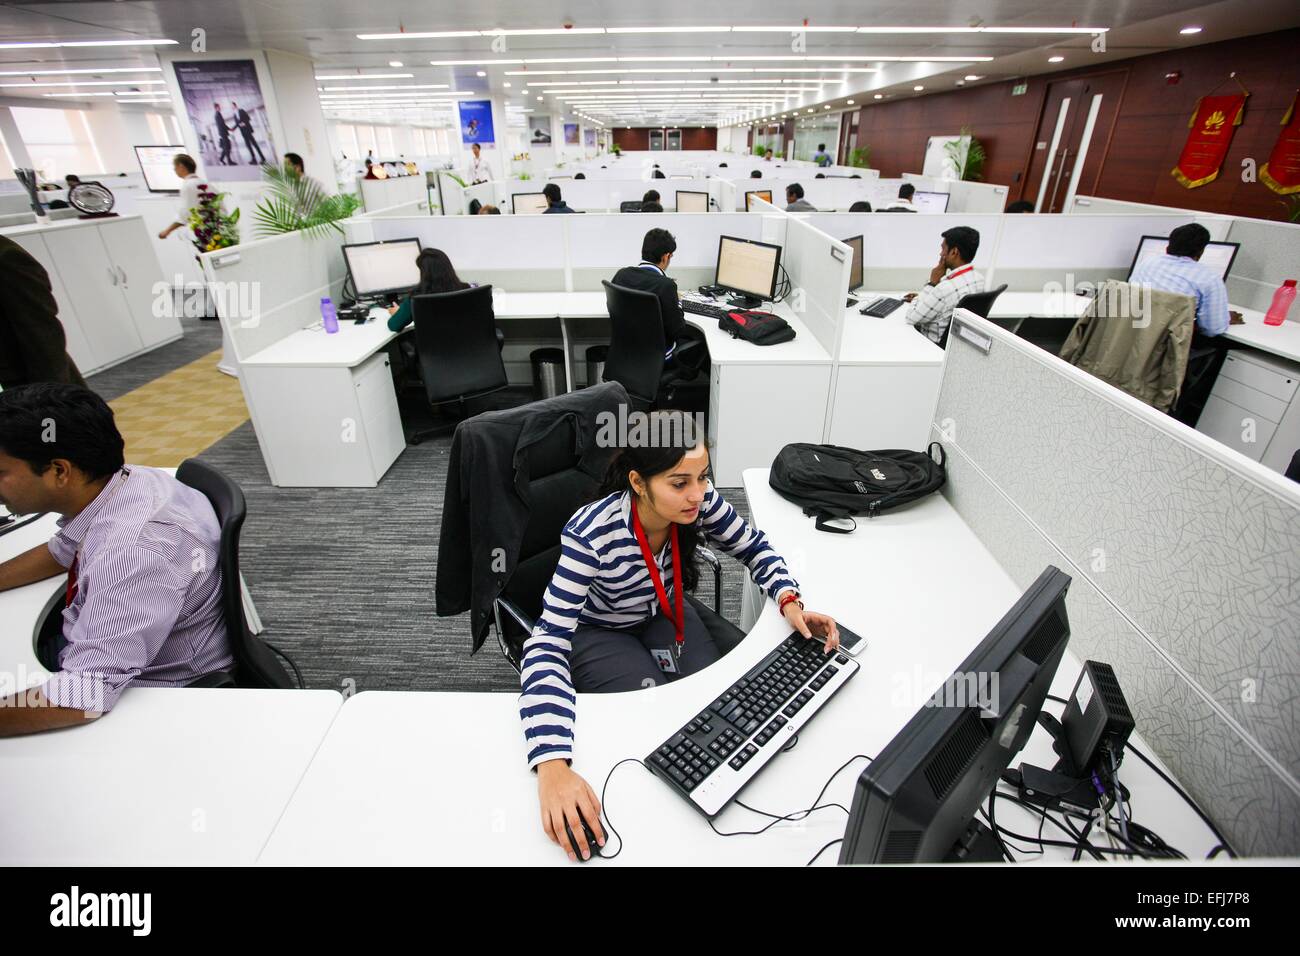 (150205) -- BENGALURU, Feb. 5, 2015 (Xinhua) -- Employees work at Huawei's new research and development center in Bengaluru, India, Feb. 5, 2015. Chinese multinational networking and telecommunications equipment and services company Huawei on Thursday launched its new research and development center in Bengaluru. With an investment of 170 million U.S. dollars and an area of 20 acres, it is the largest research and development center of Huawei outside of China. The new center is also an exhibit of cooperation between China and India in the field of information and communications technology (ICT Stock Photo